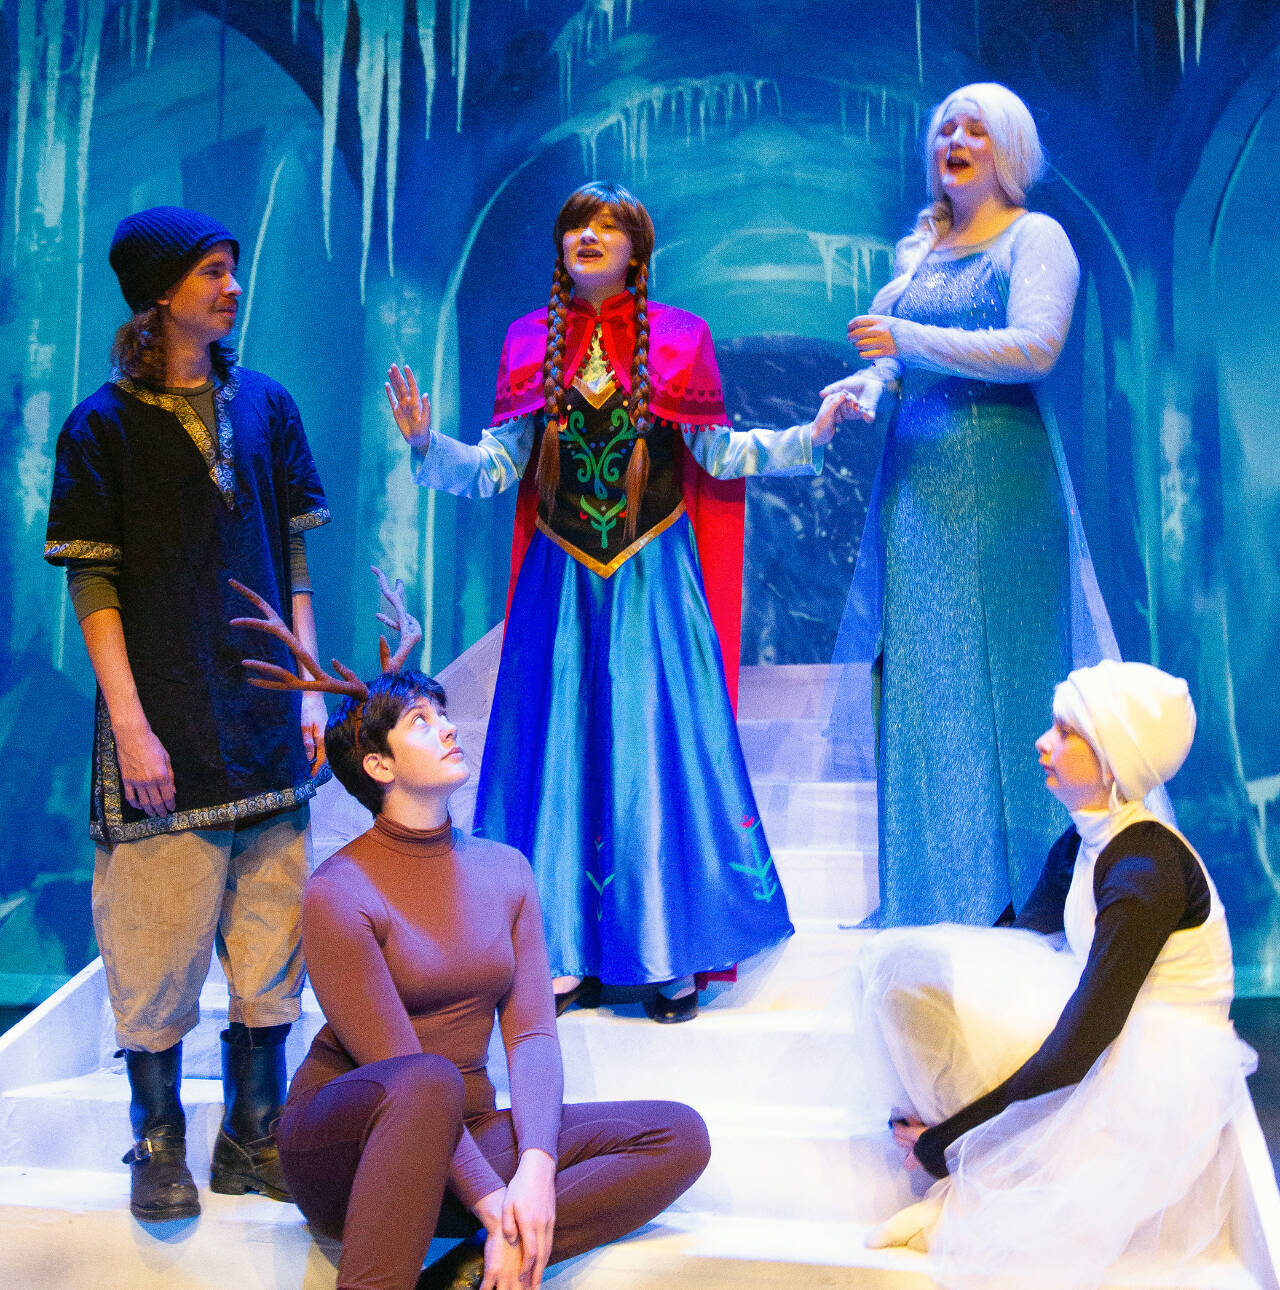 Ghostlight Productions offers “Frozen Jr.,” beginning Friday at the Sequim High School auditorium. Rehearsing a scene last week are, from left, Sean McDaniel as Kristoff, Molly Beeman as Sven, Lili Mitchell as Anna, Olivia Wray as Elsa, and Josie Cooley as Olaf. (Bob Spink/Ghostlight Productions)